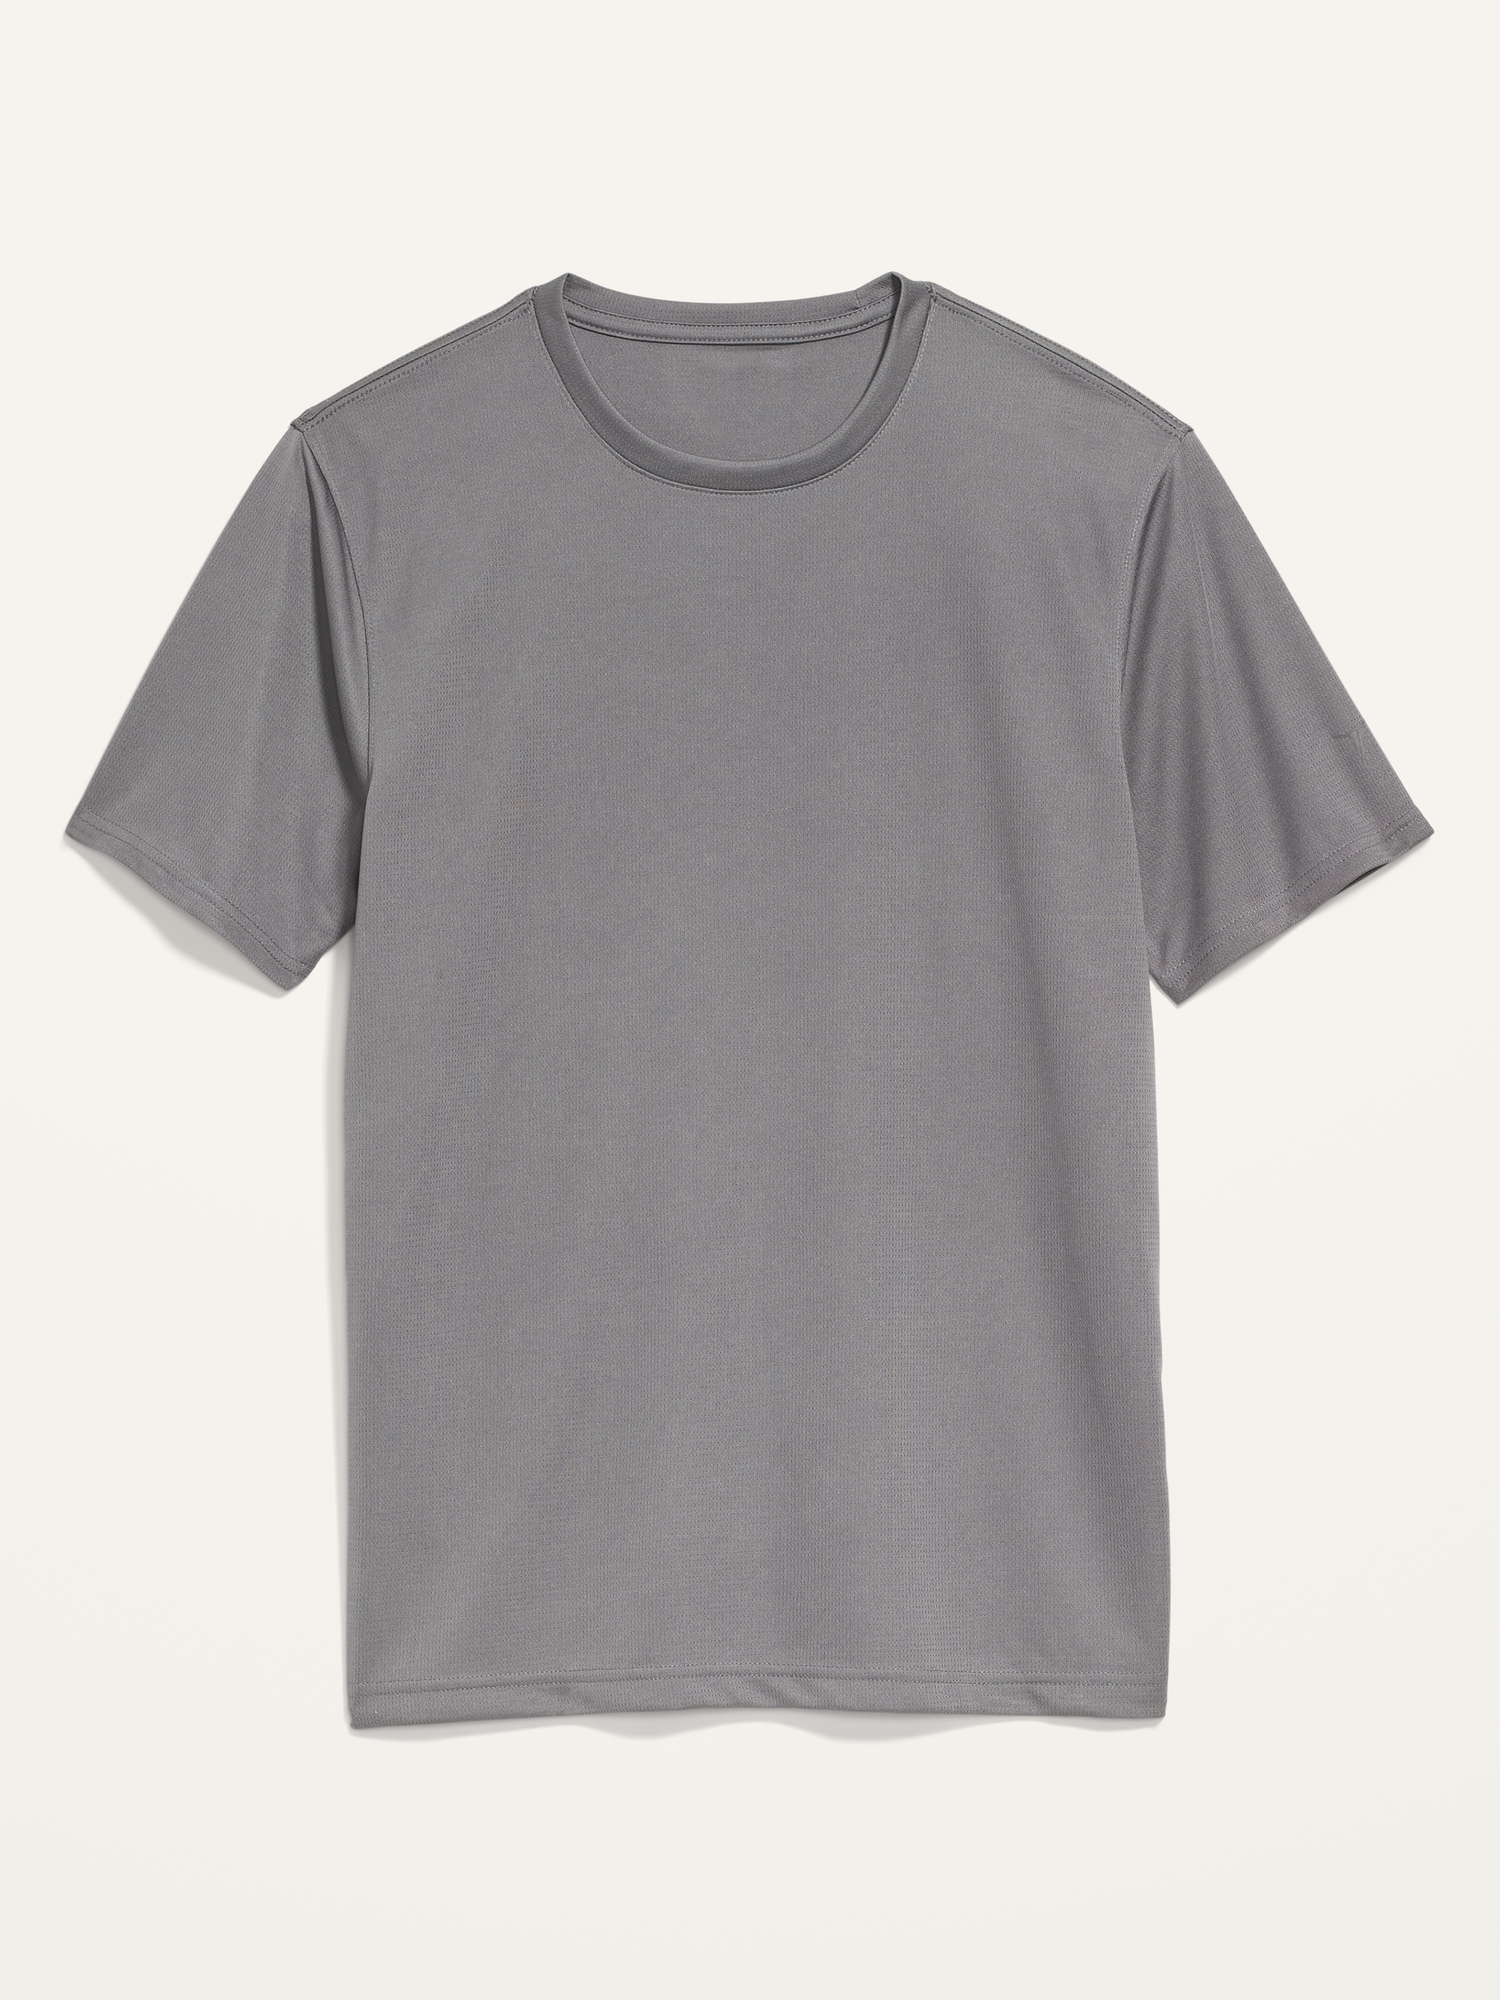 Go-Dry Cool Odor-Control Mesh Core T-Shirt | Old Navy